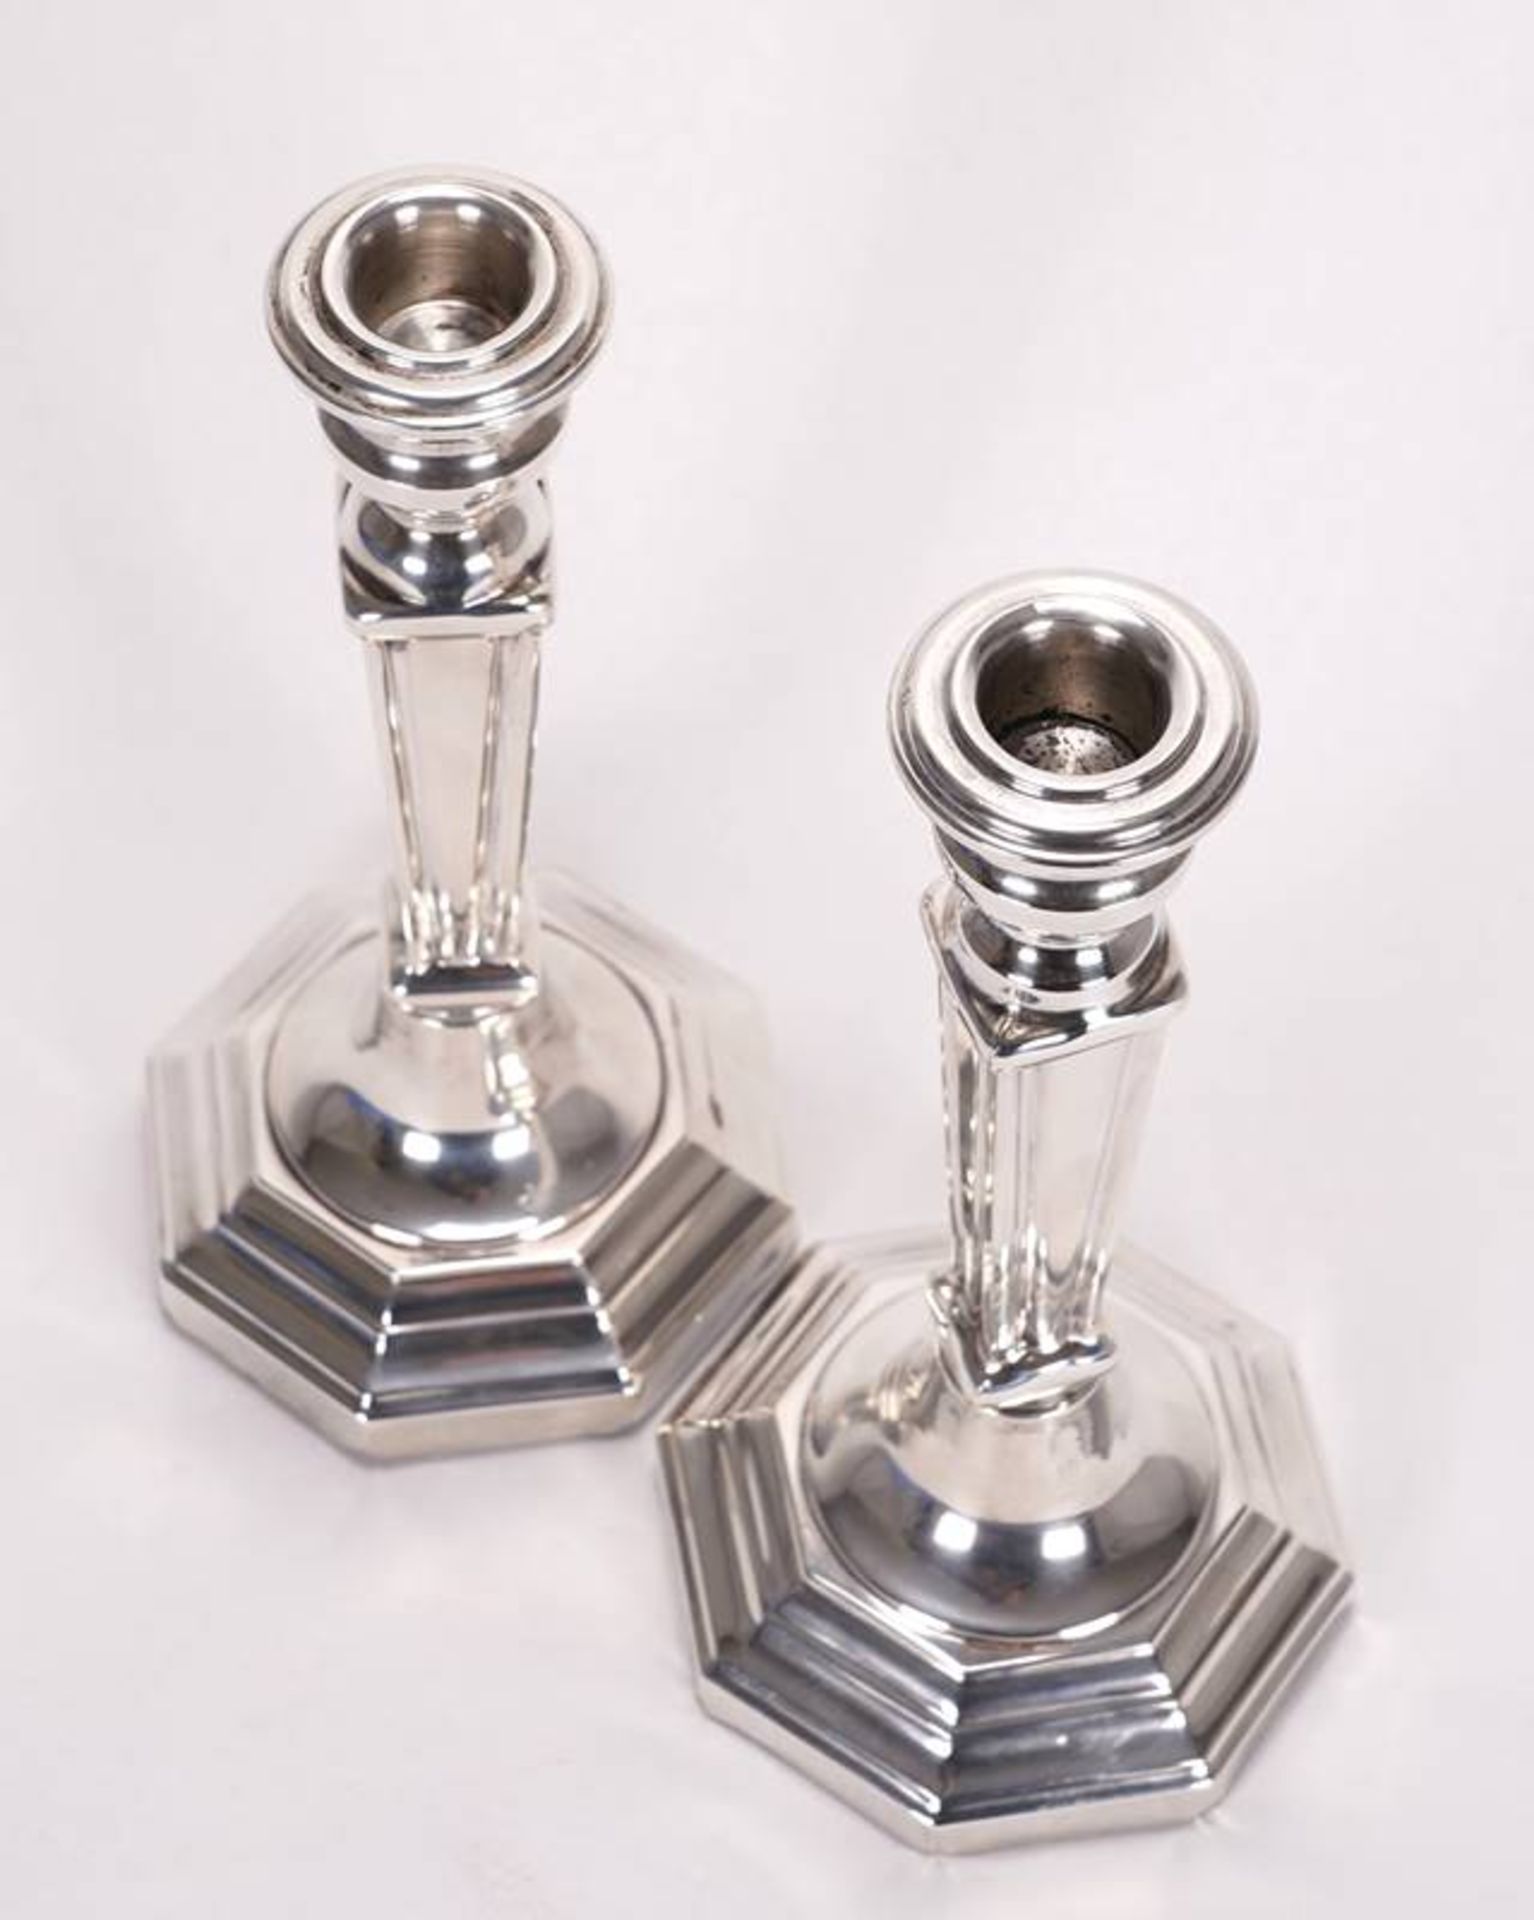 Pair of candlesticks - Image 2 of 3